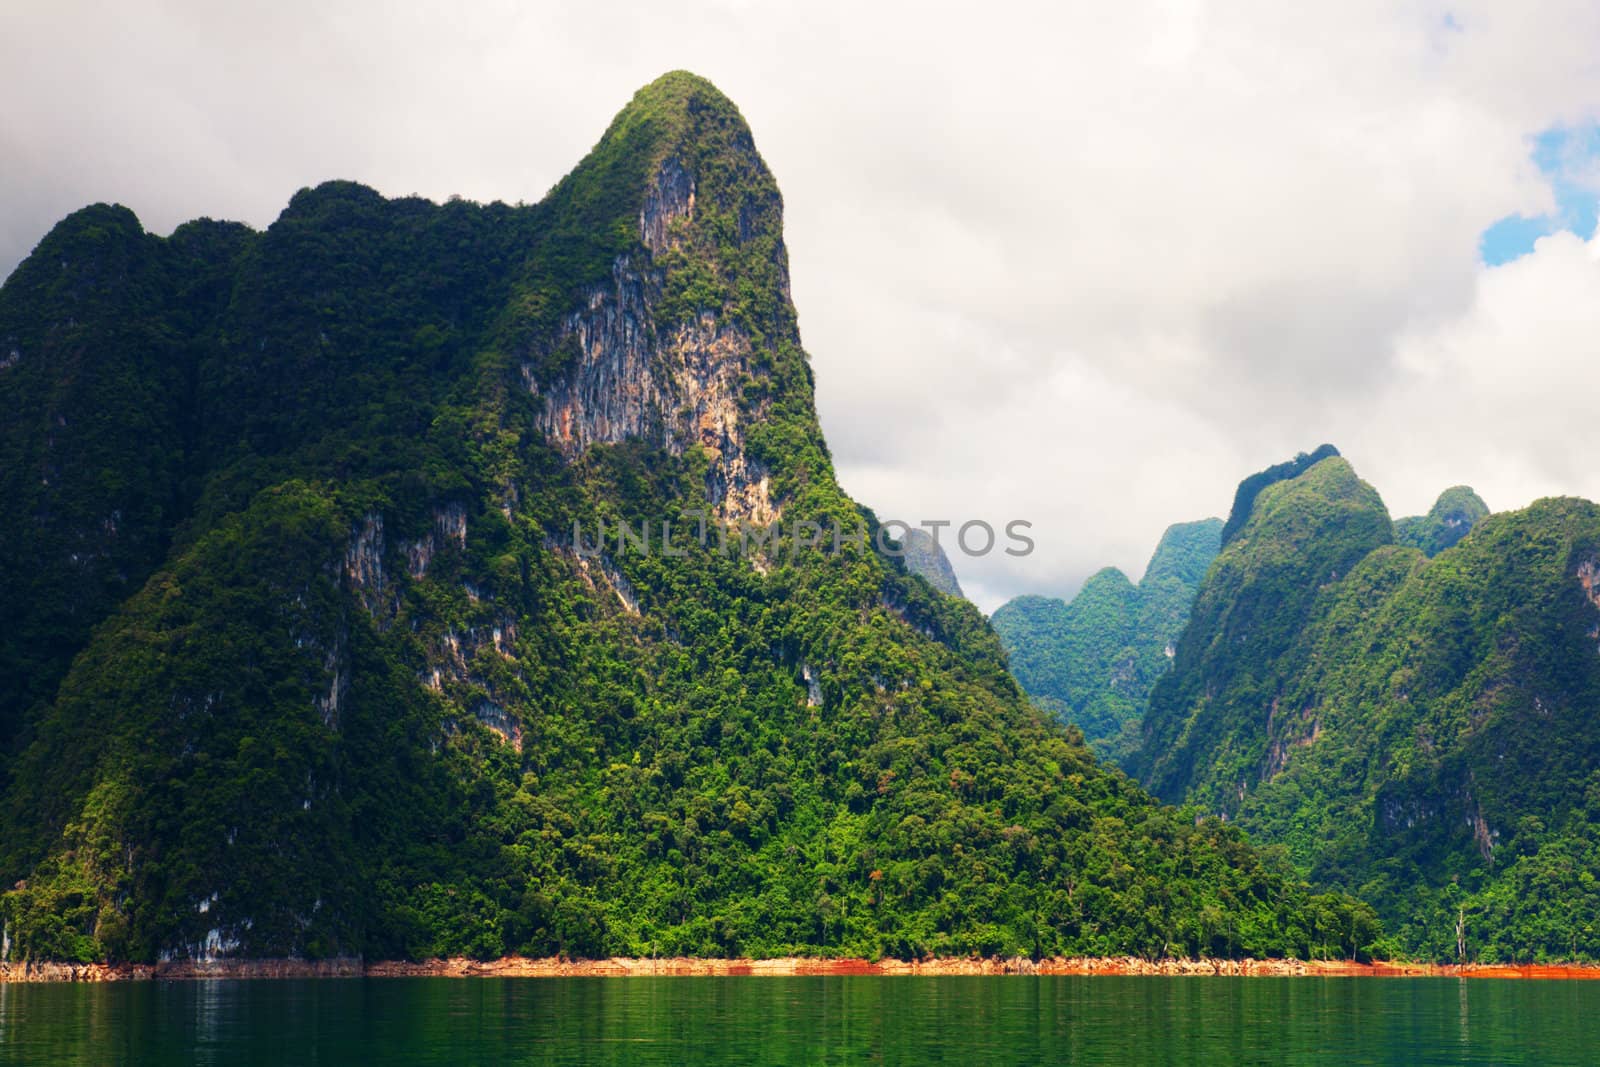 High cliffs on the tropical island. Exotic tropical landscape.